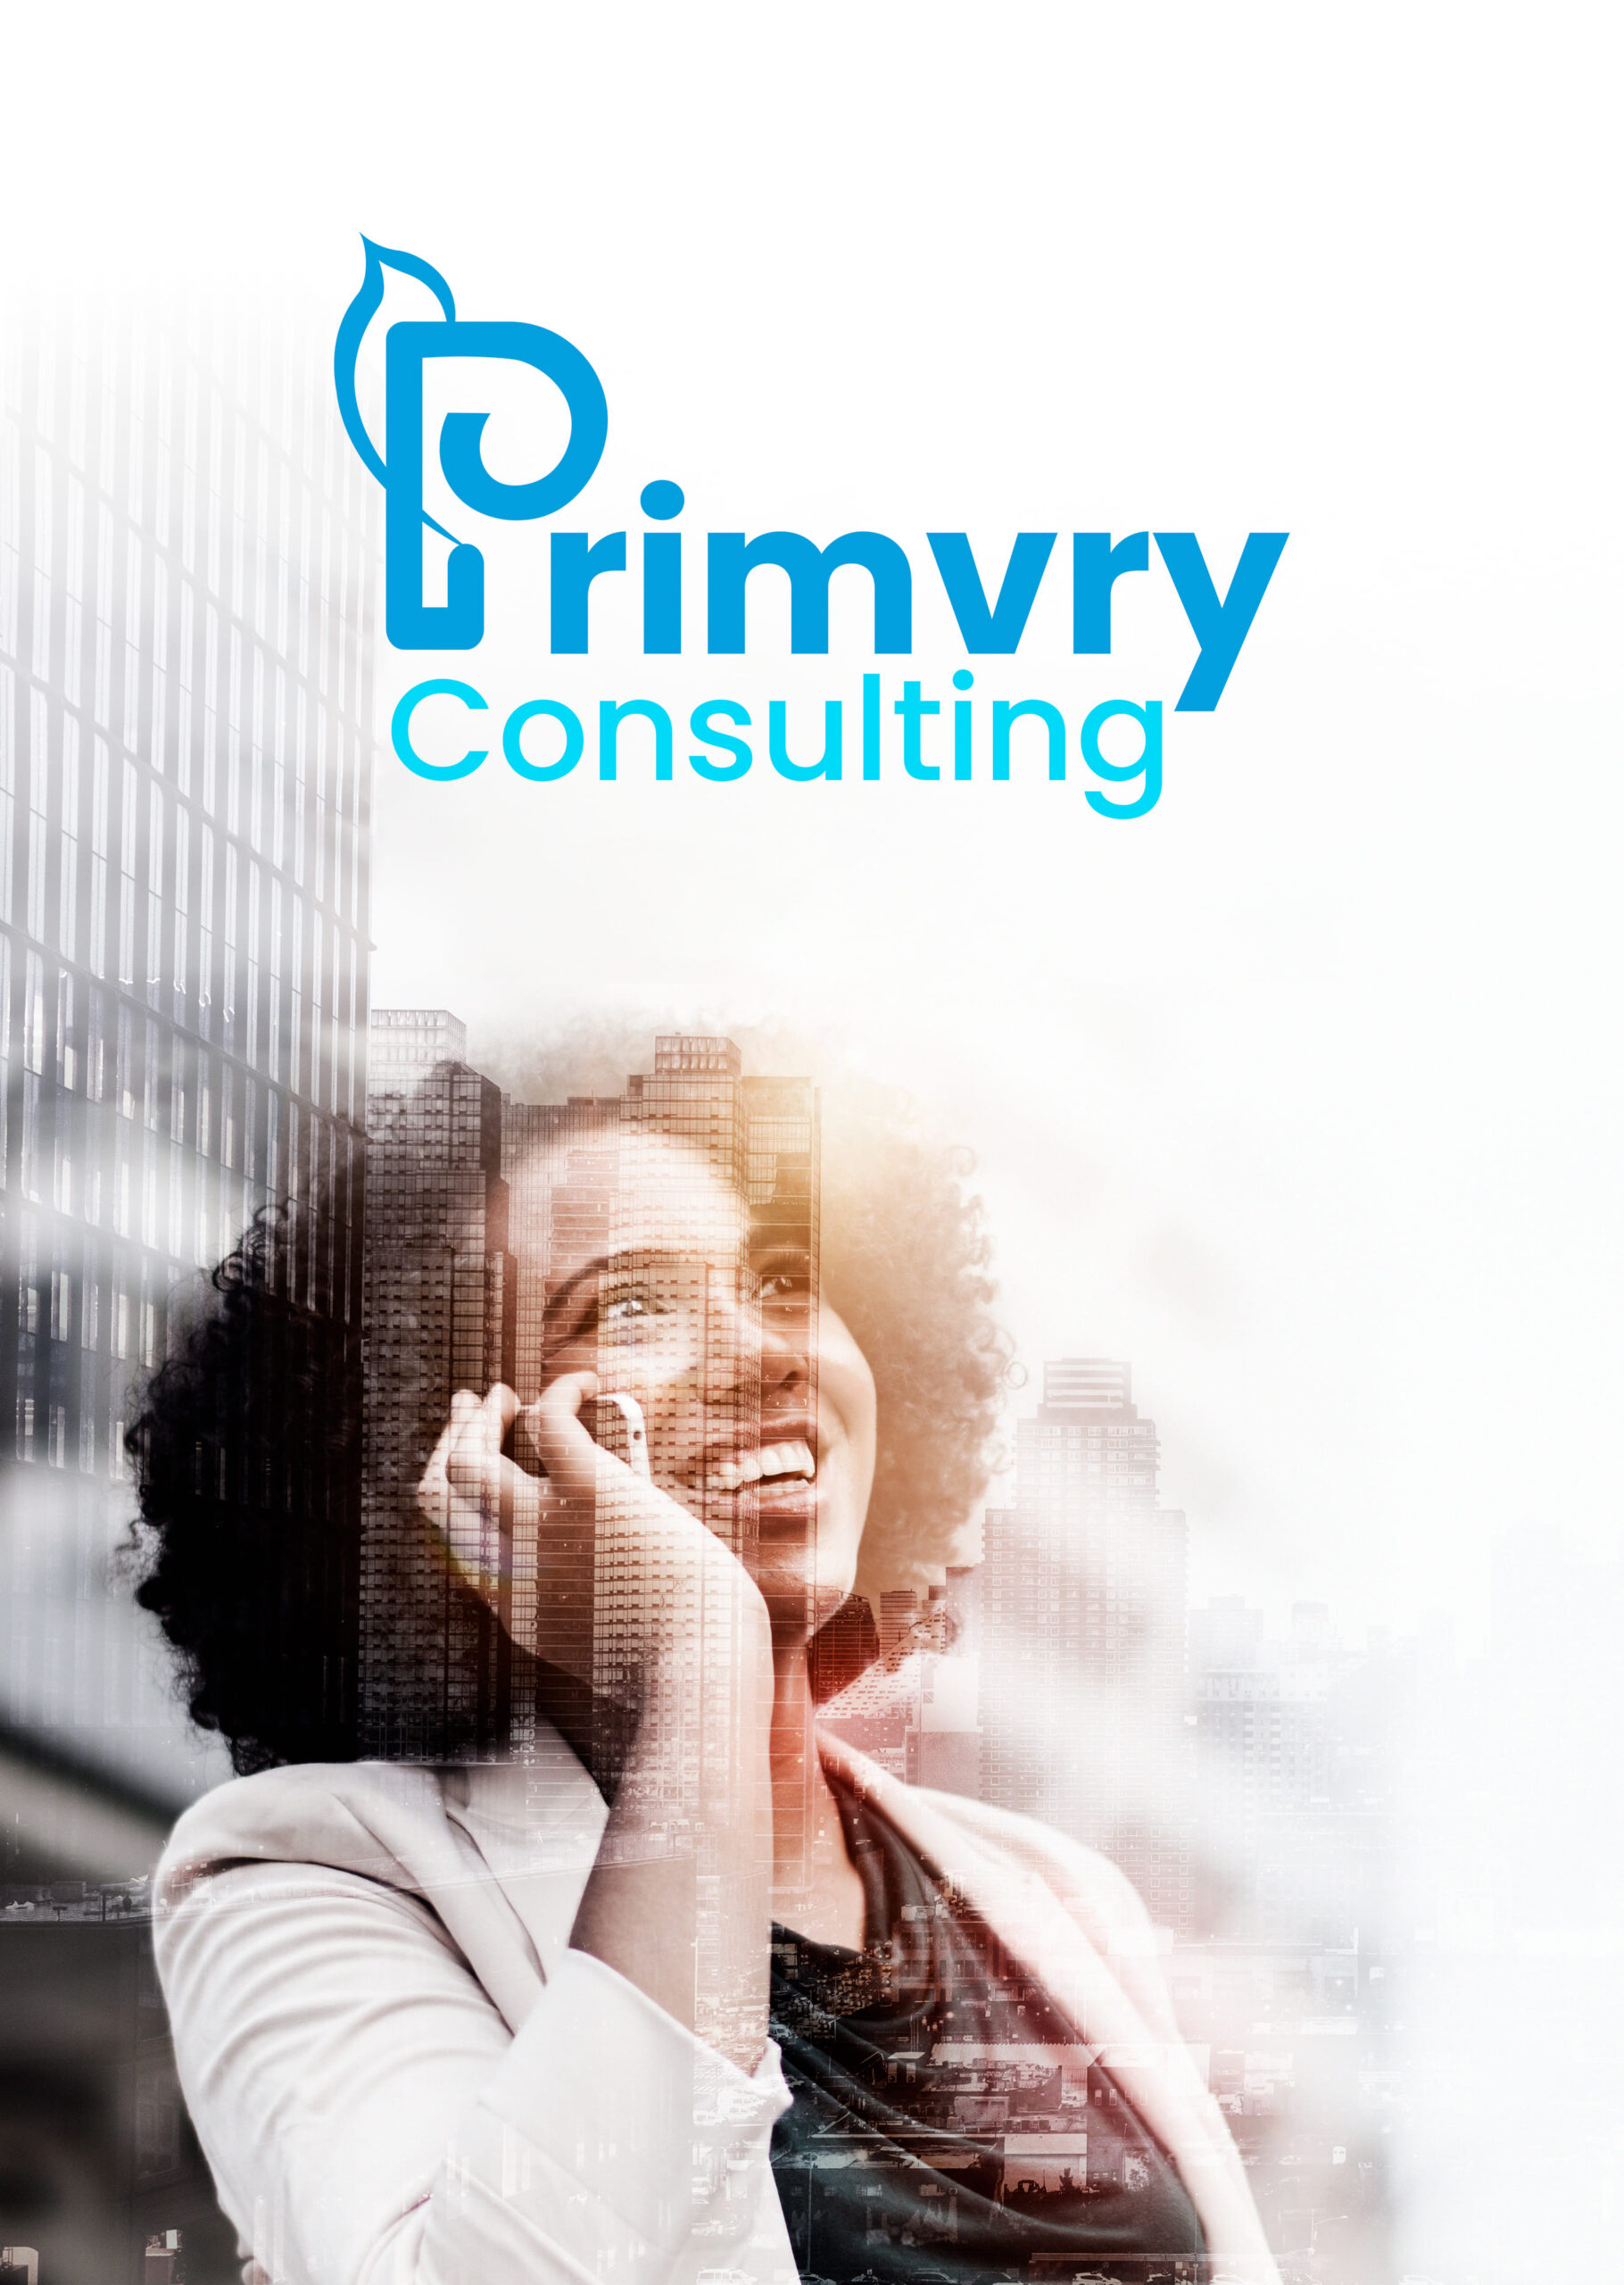 Primvry Consulting Limited Service